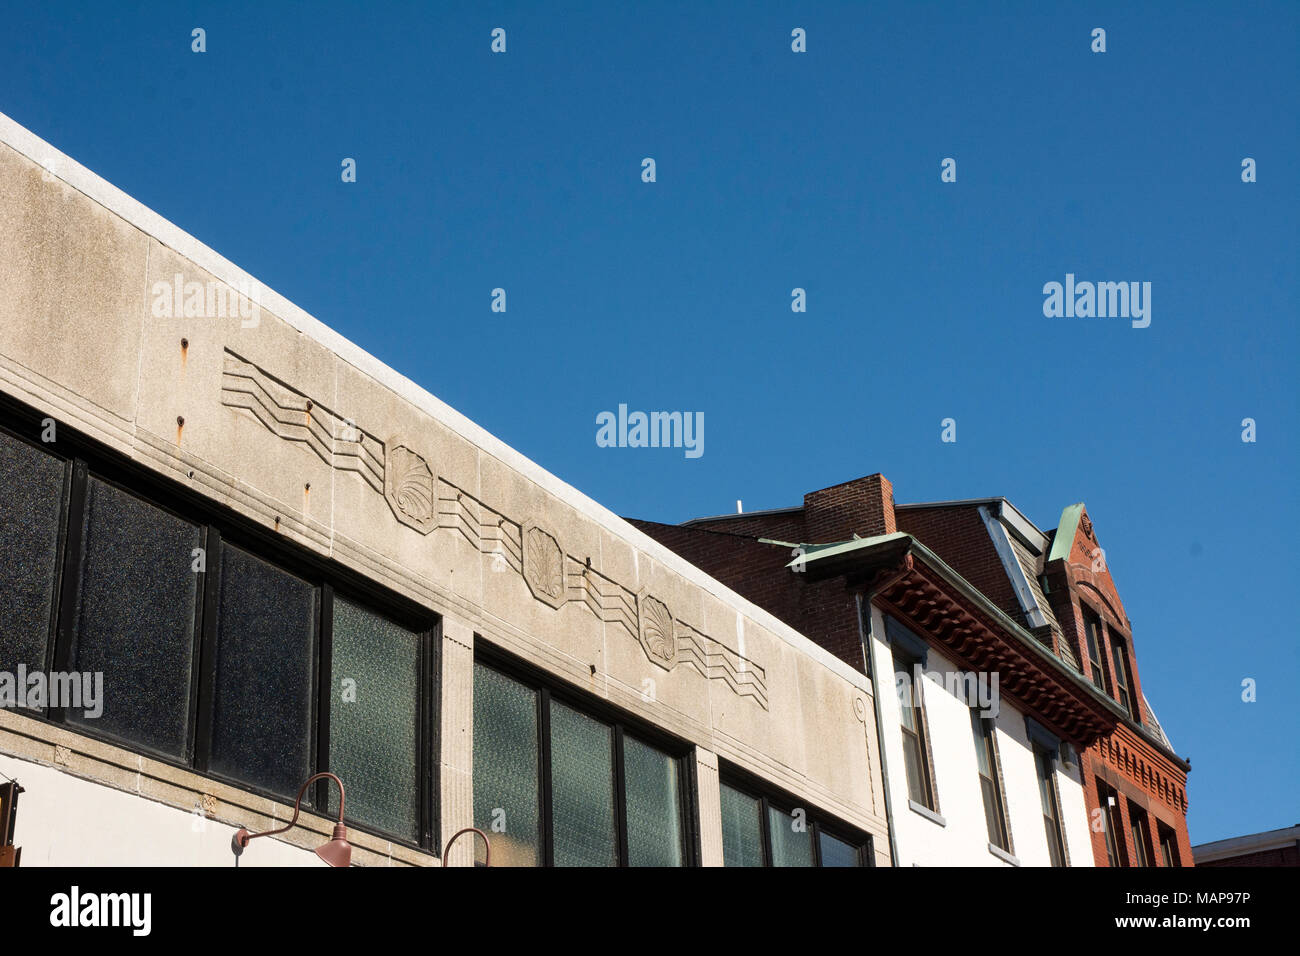 Inscription on top of building. Stock Photo